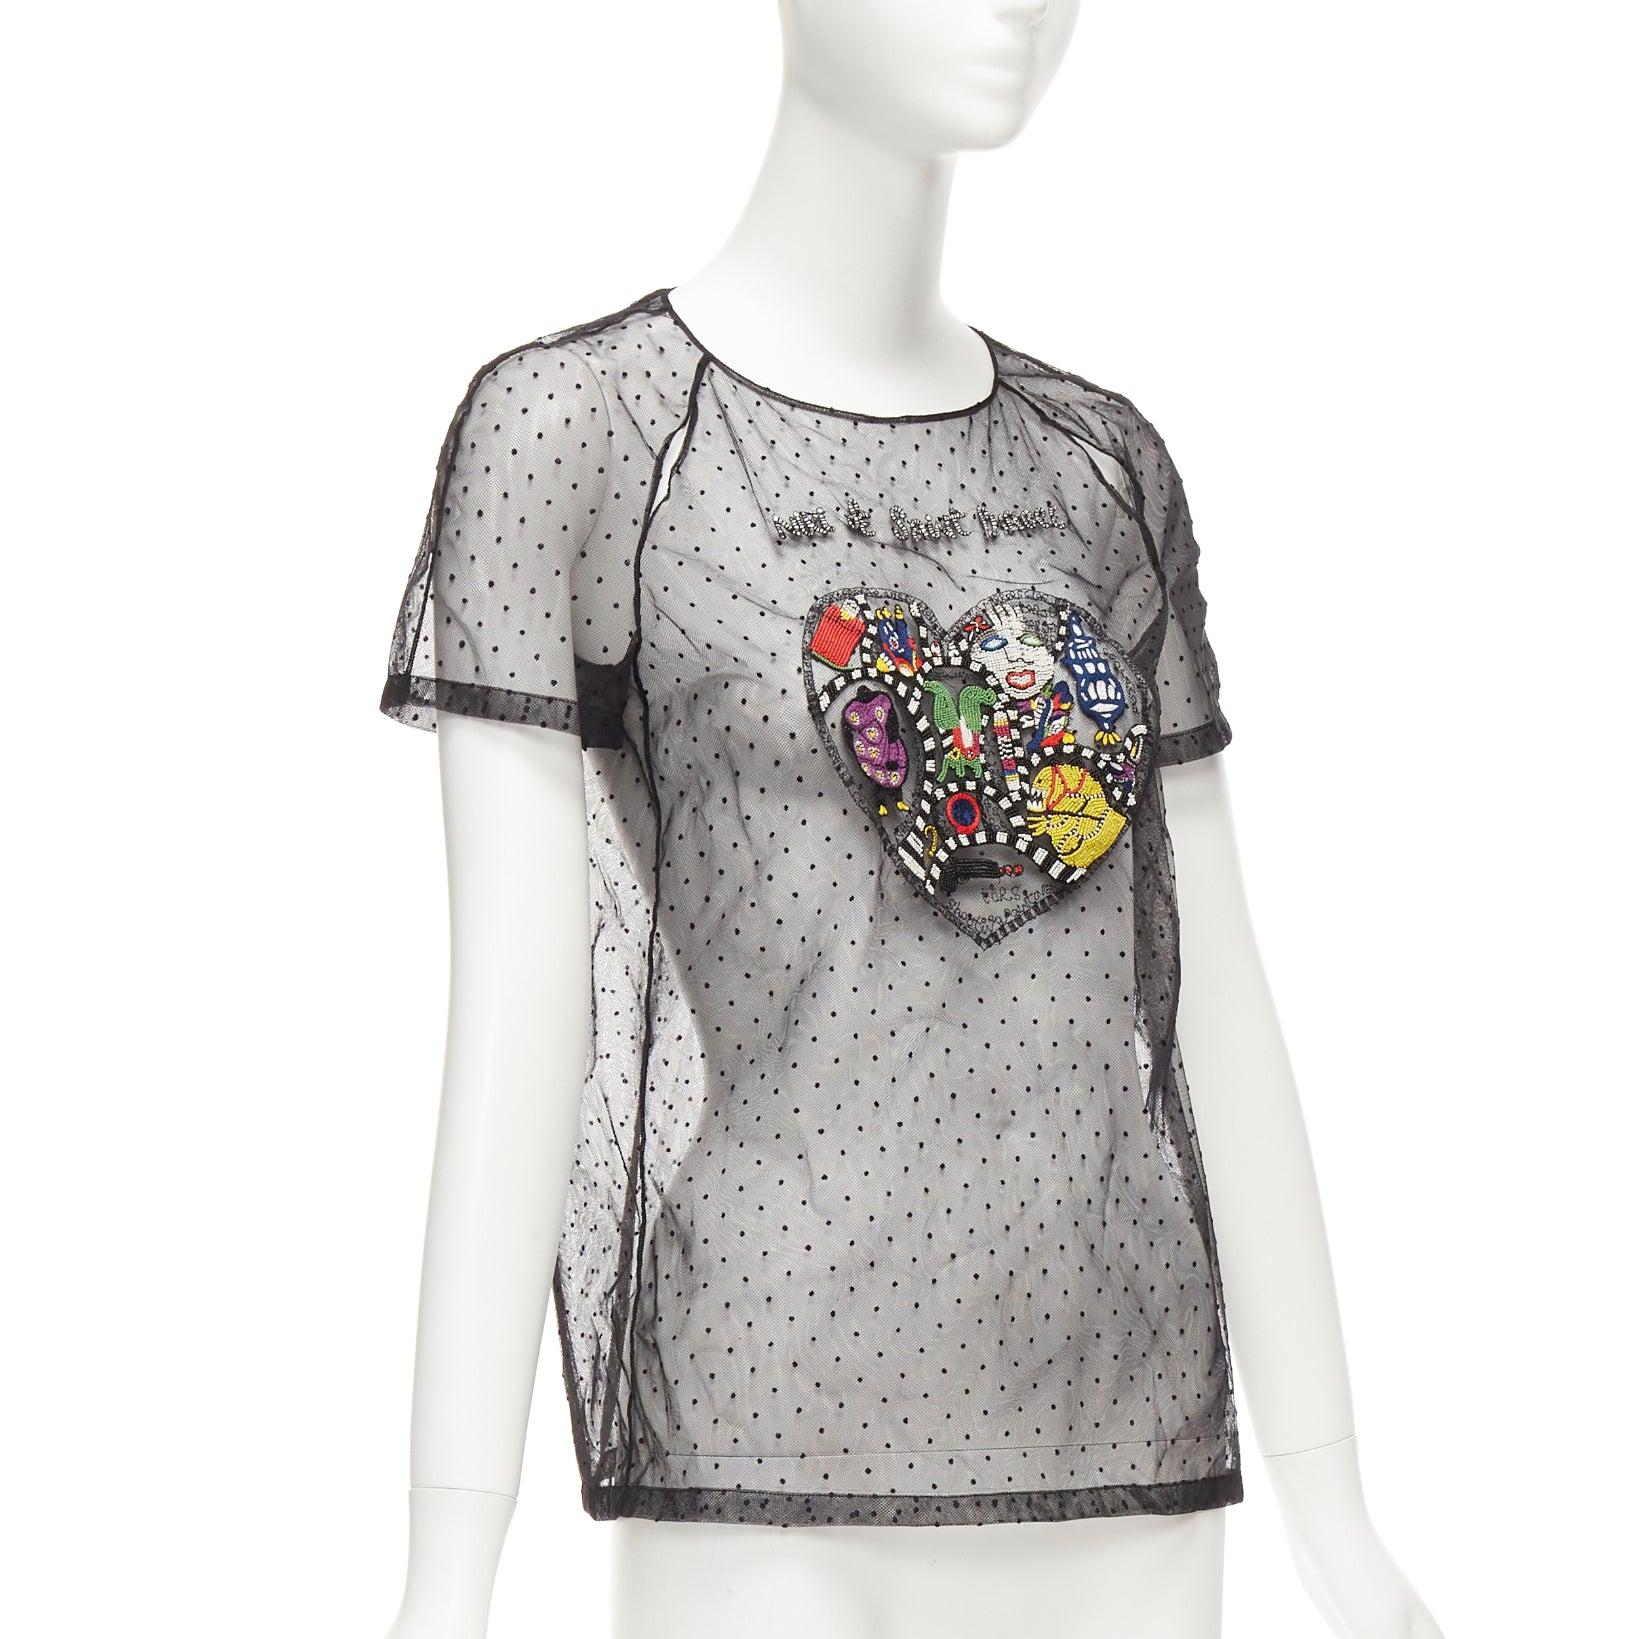 CHRISTIAN DIOR Niki de Saint Phalle black colourful beaded dot mesh sheer top In Excellent Condition For Sale In Hong Kong, NT